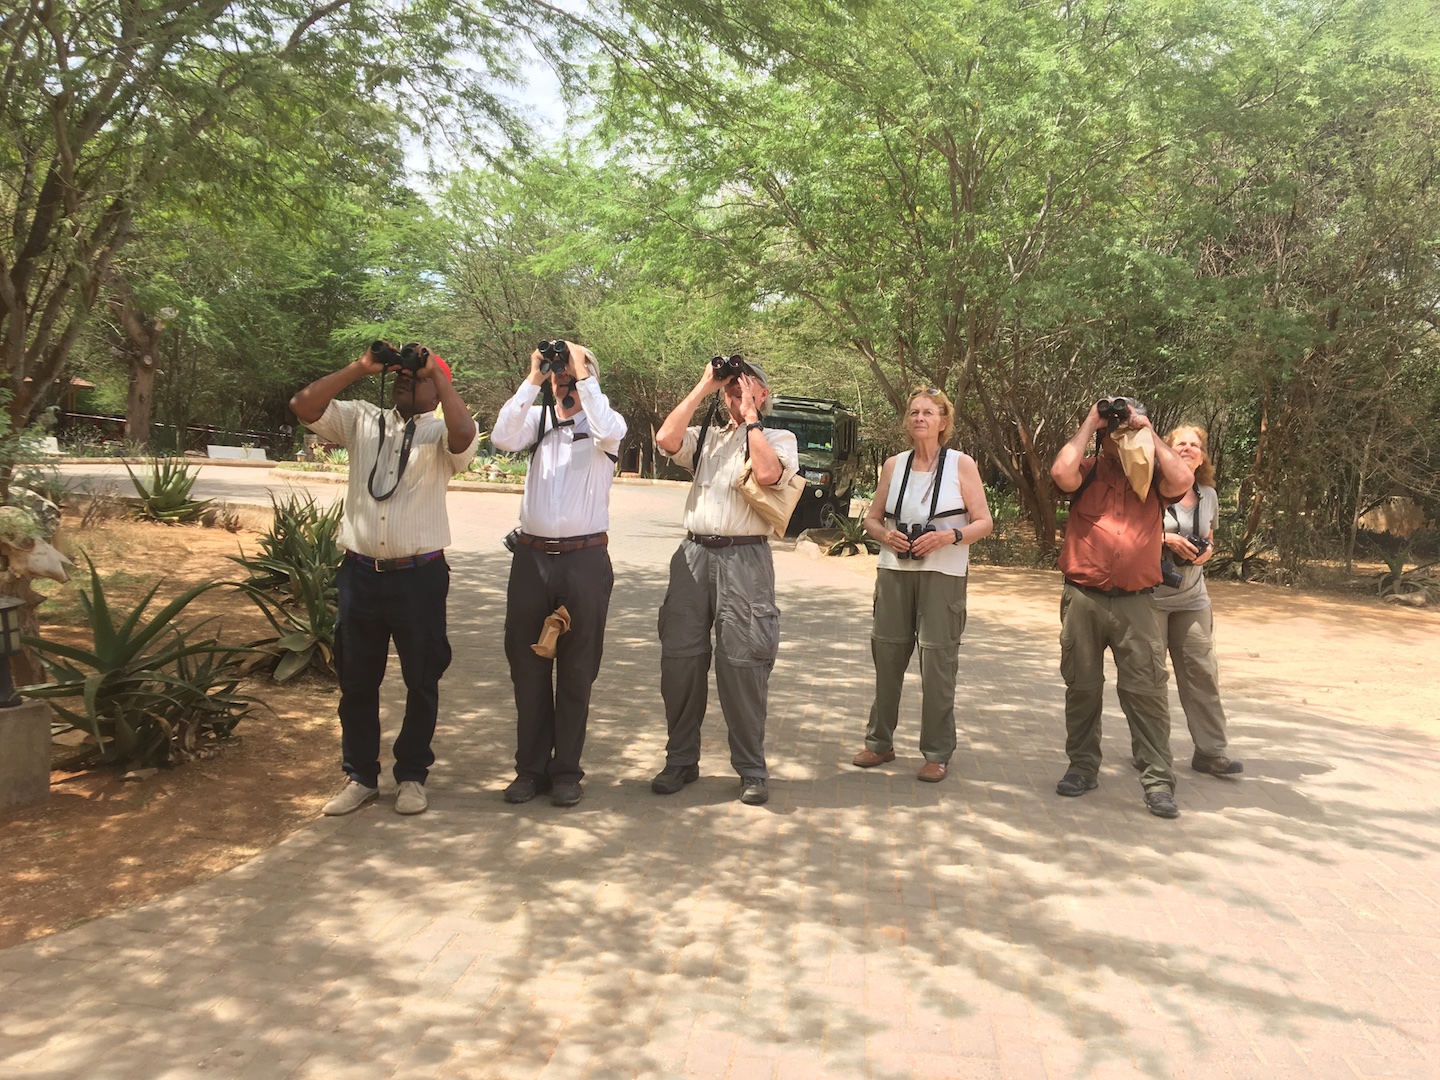 L-R: Driver Maxwell, Denis, Nicholas, Carolyn, Mitch and Sonny from USA at Aruba Camp, Tsavo East during a 21-day birding trip in February 2019 